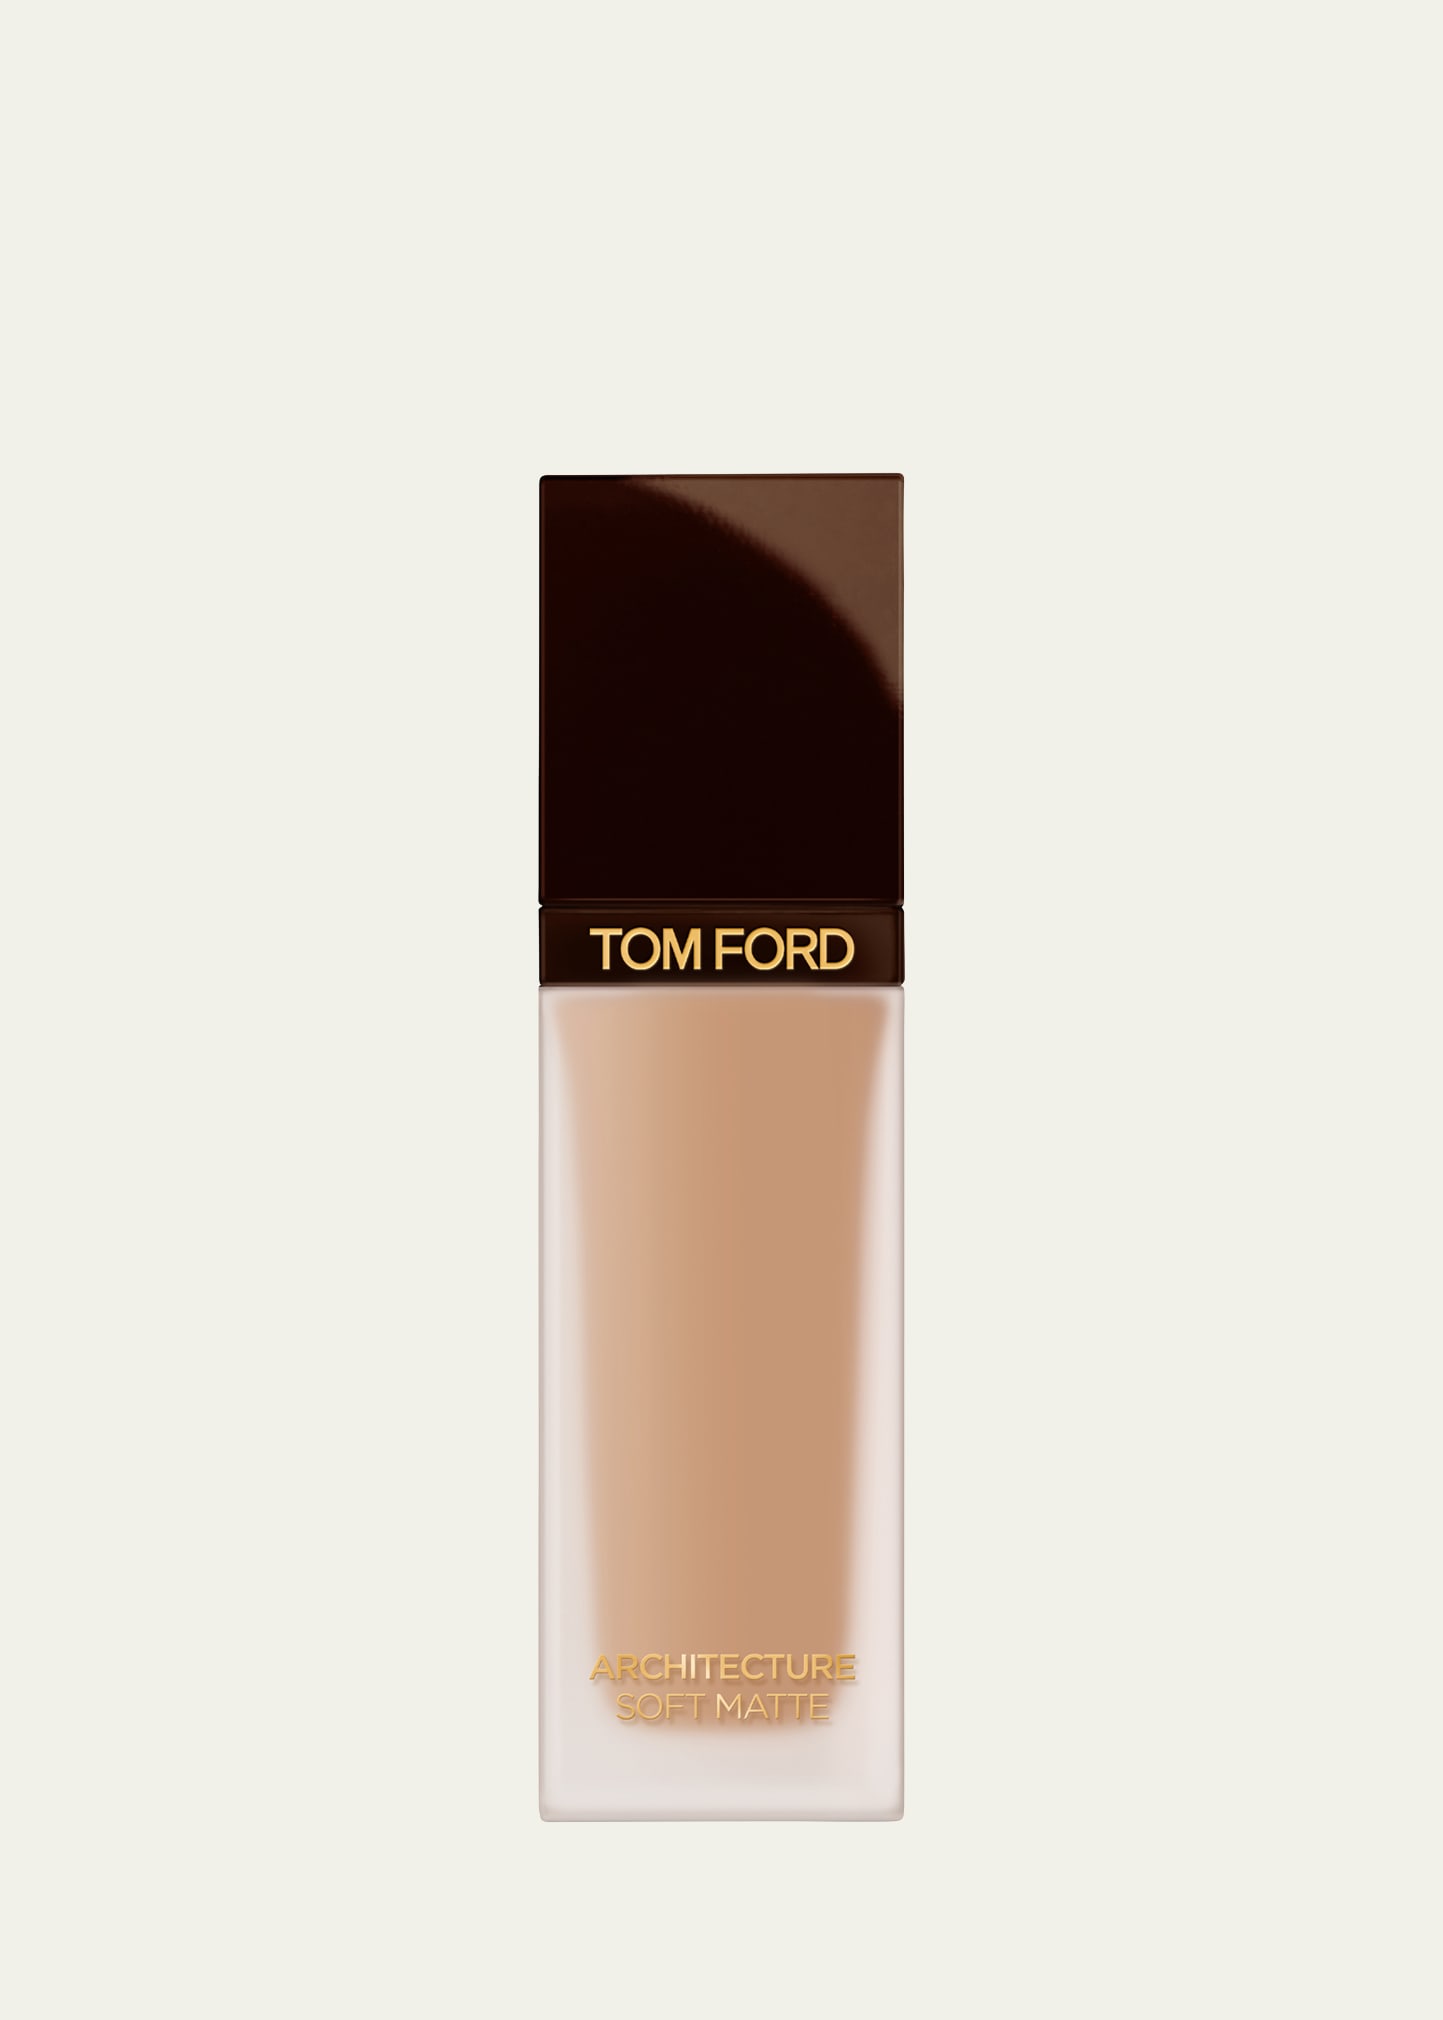 Tom Ford Architecture Soft Matte Foundation In Asm - 5.1 Cool Al